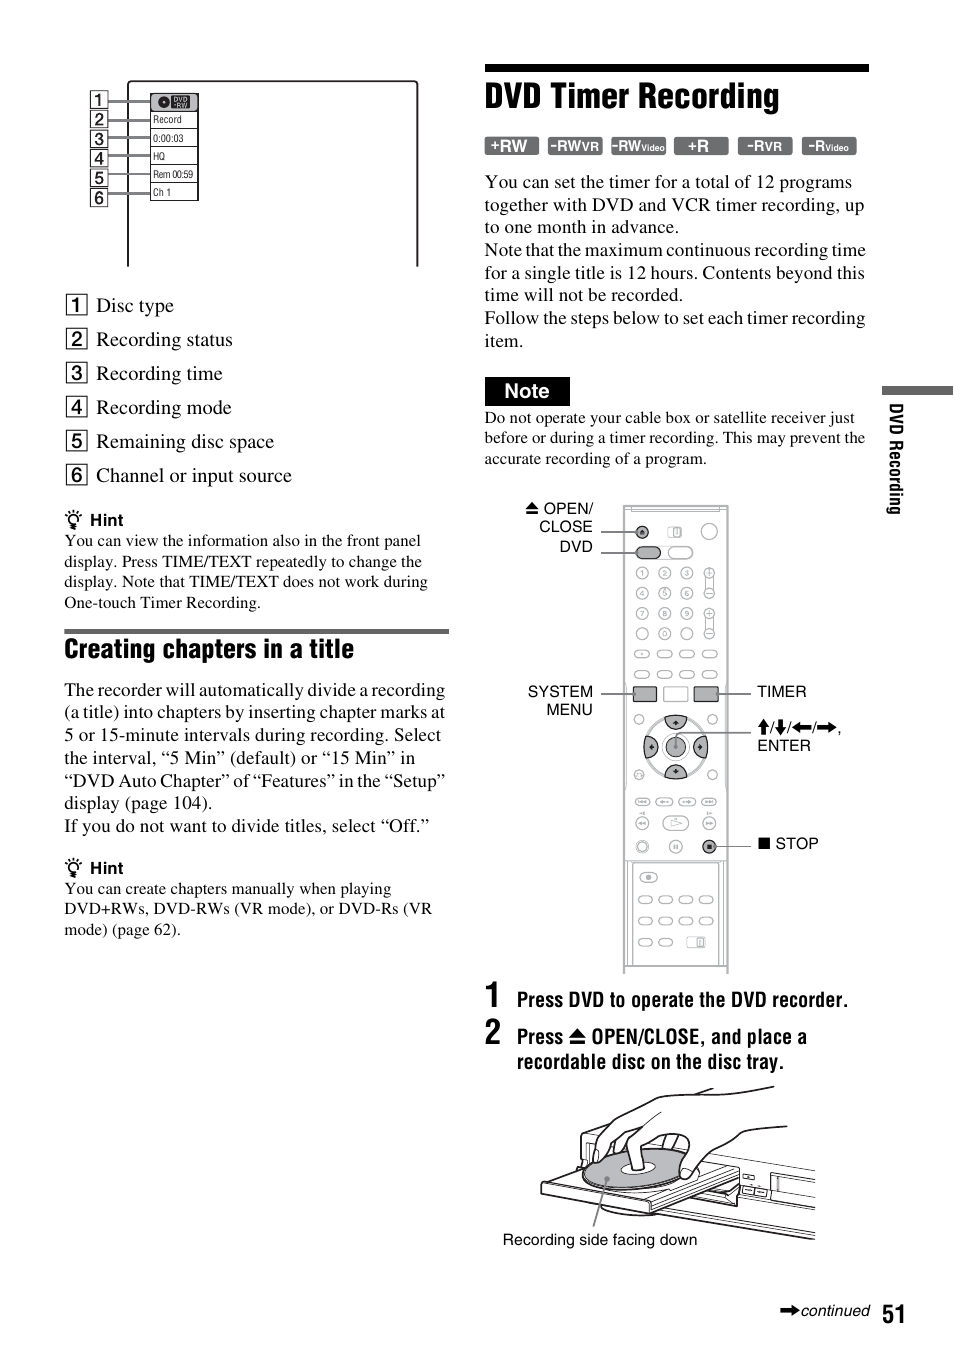 Dvd timer recording, Creating chapters in a title, Press dvd to operate the dvd recorder | Sony RDR-VX521 User Manual | Page 51 / 132